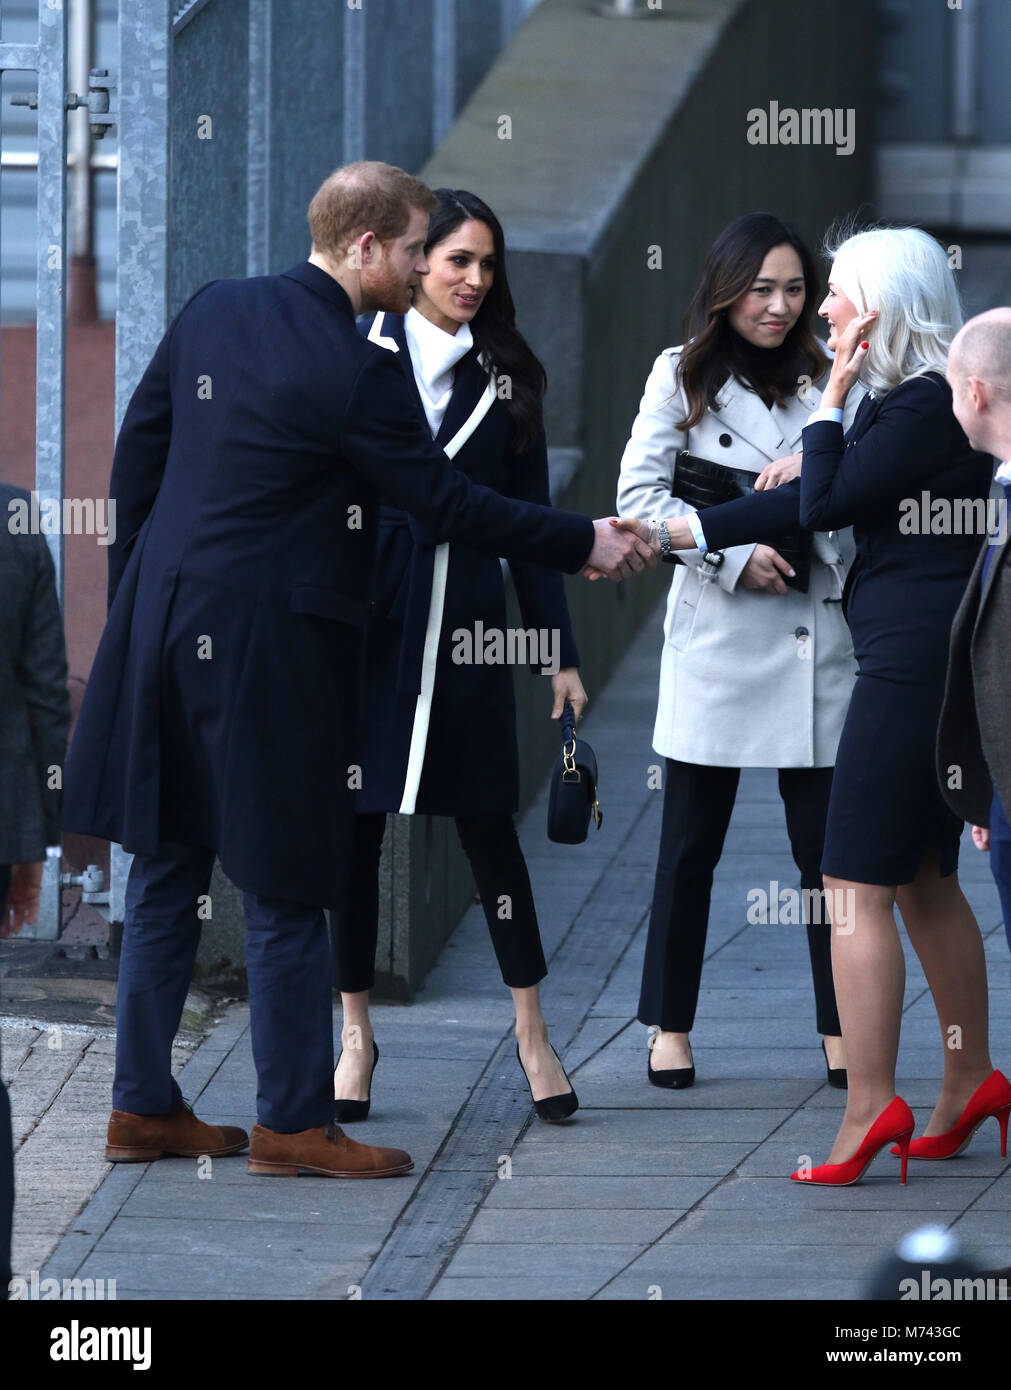 Birmingham, UK. 8th March, 2018. HRH Prince Harry (of Wales) and Meghan Markle, on a walkabout on International Women's Day in Birmingham at Millennium Point, Birmingham, on March 8, 2018. Credit: Paul Marriott/Alamy Live News Stock Photo